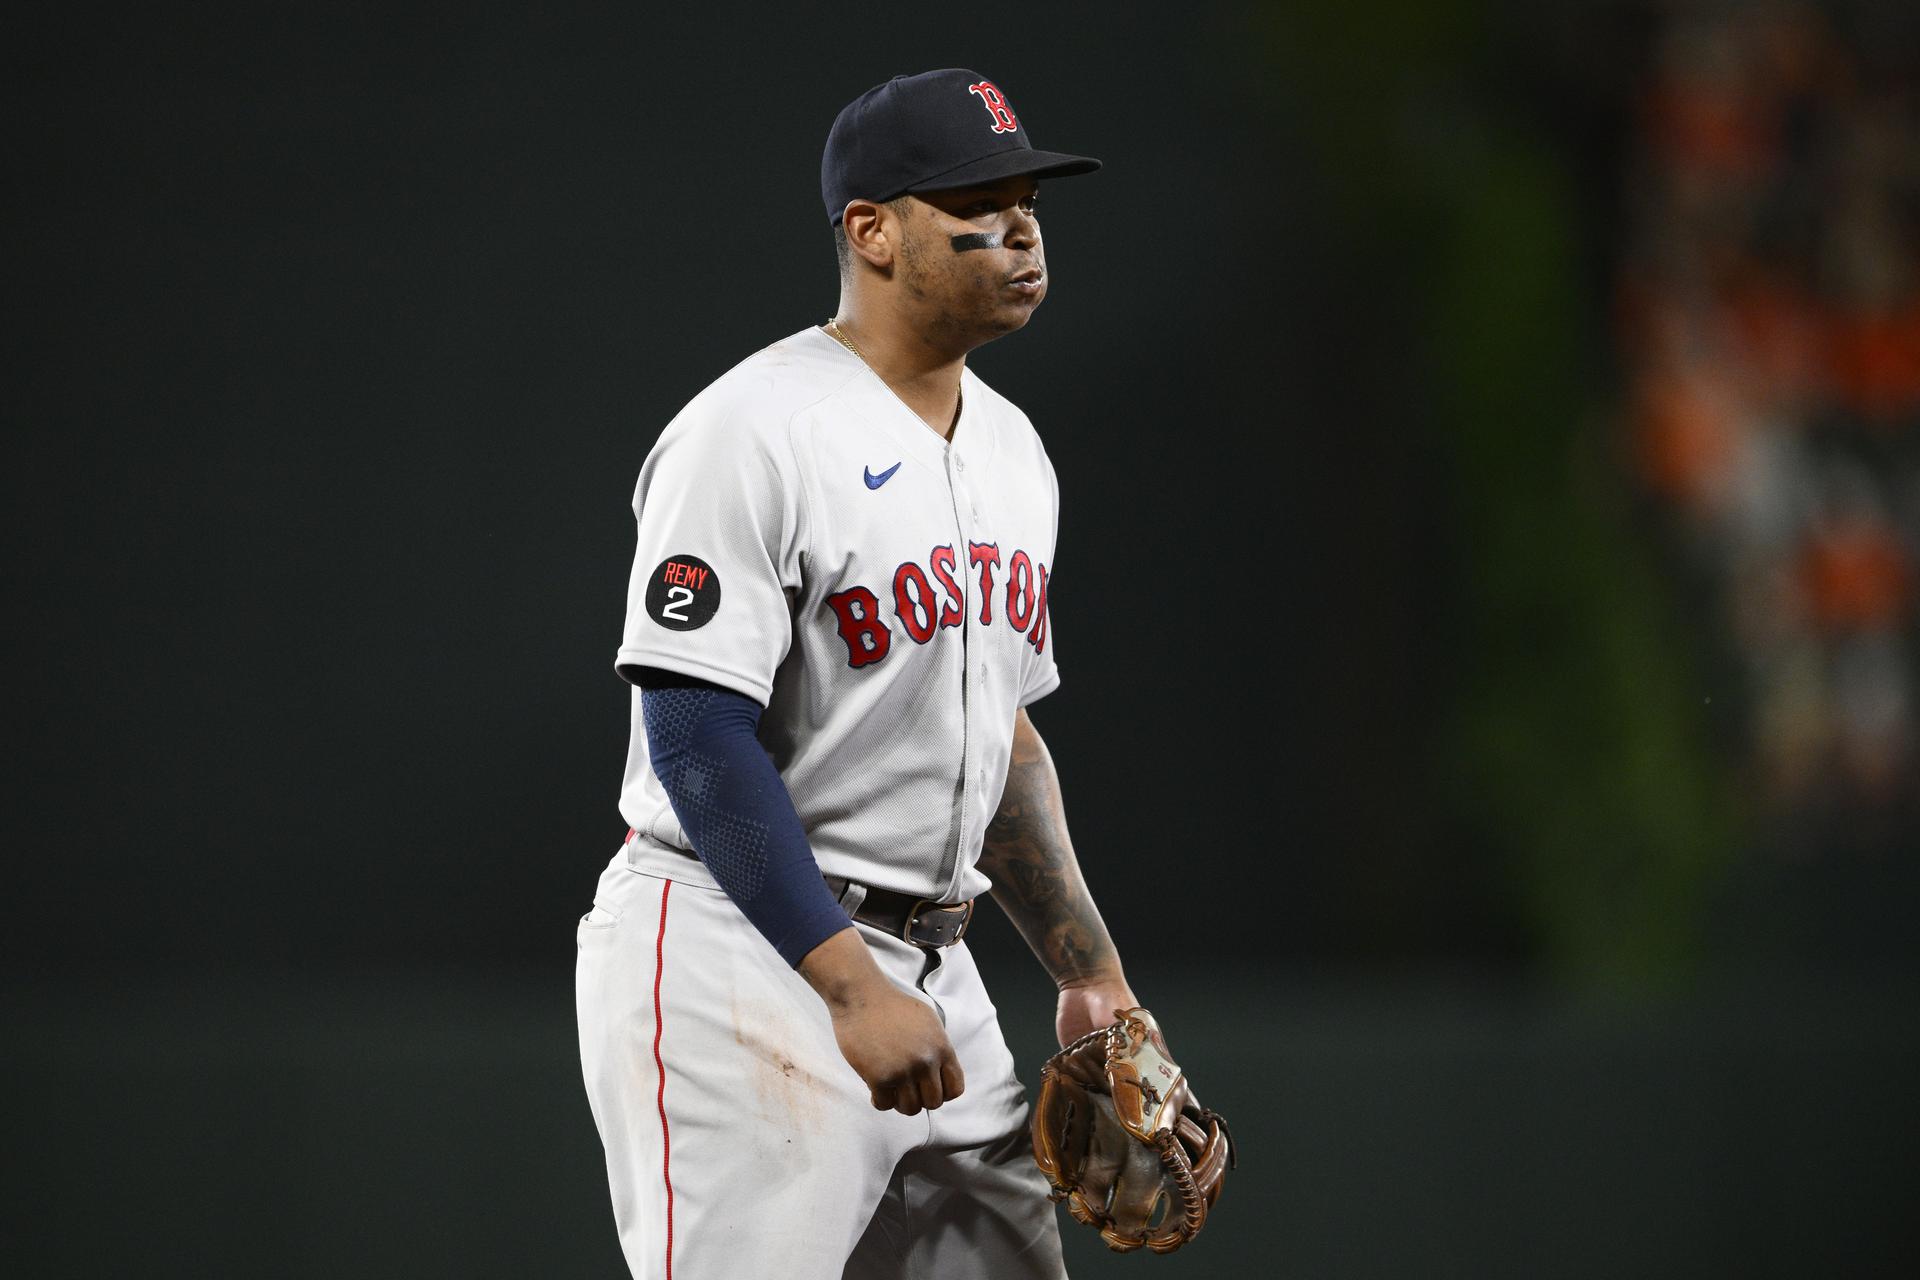 Red Sox third baseman Rafael Devers stands ready on the field